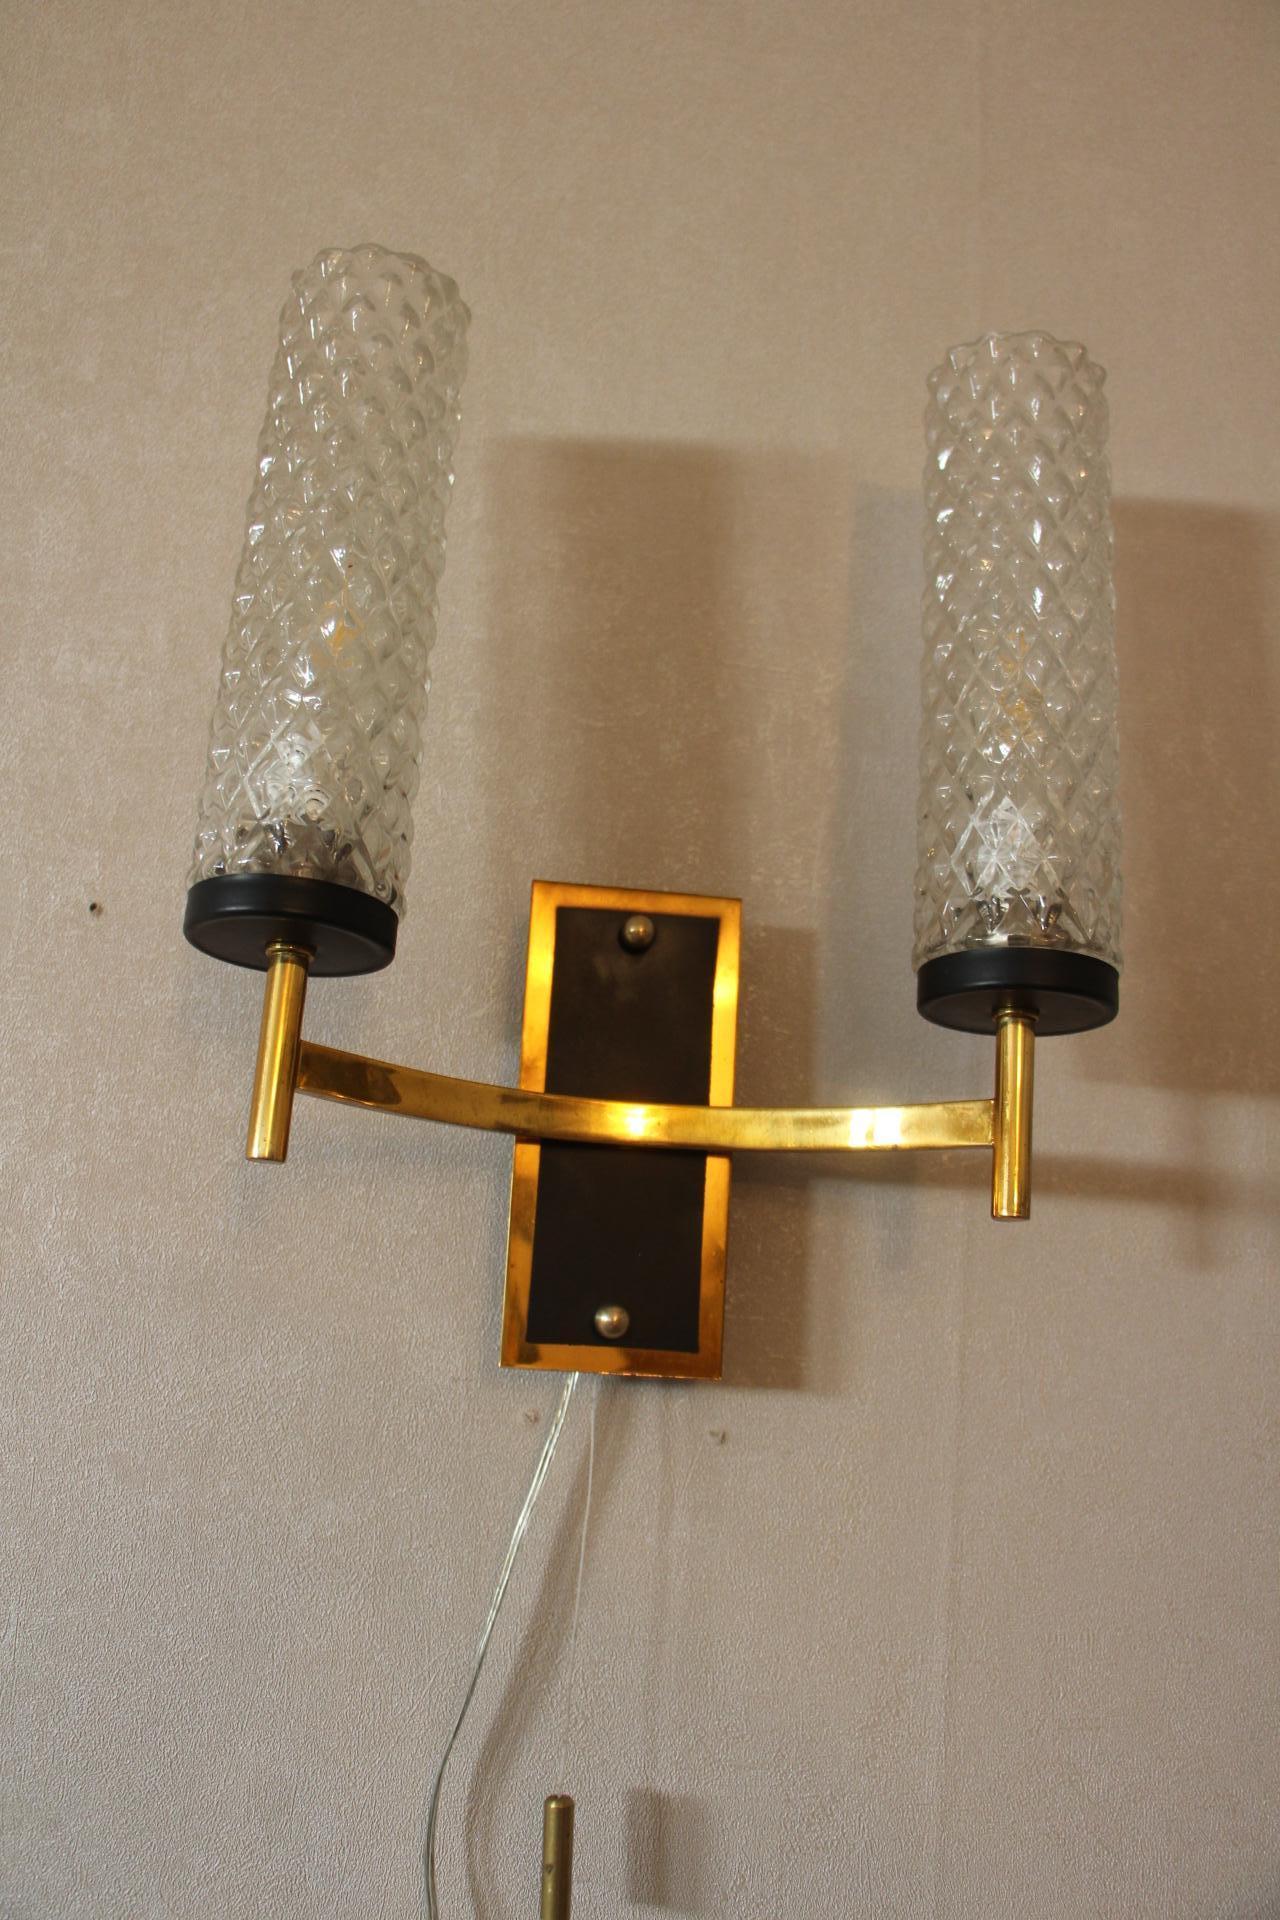 Mid-20th Century Pair of French Midcentury Sconces, Maison Arlus, Lunel Wall Lights For Sale